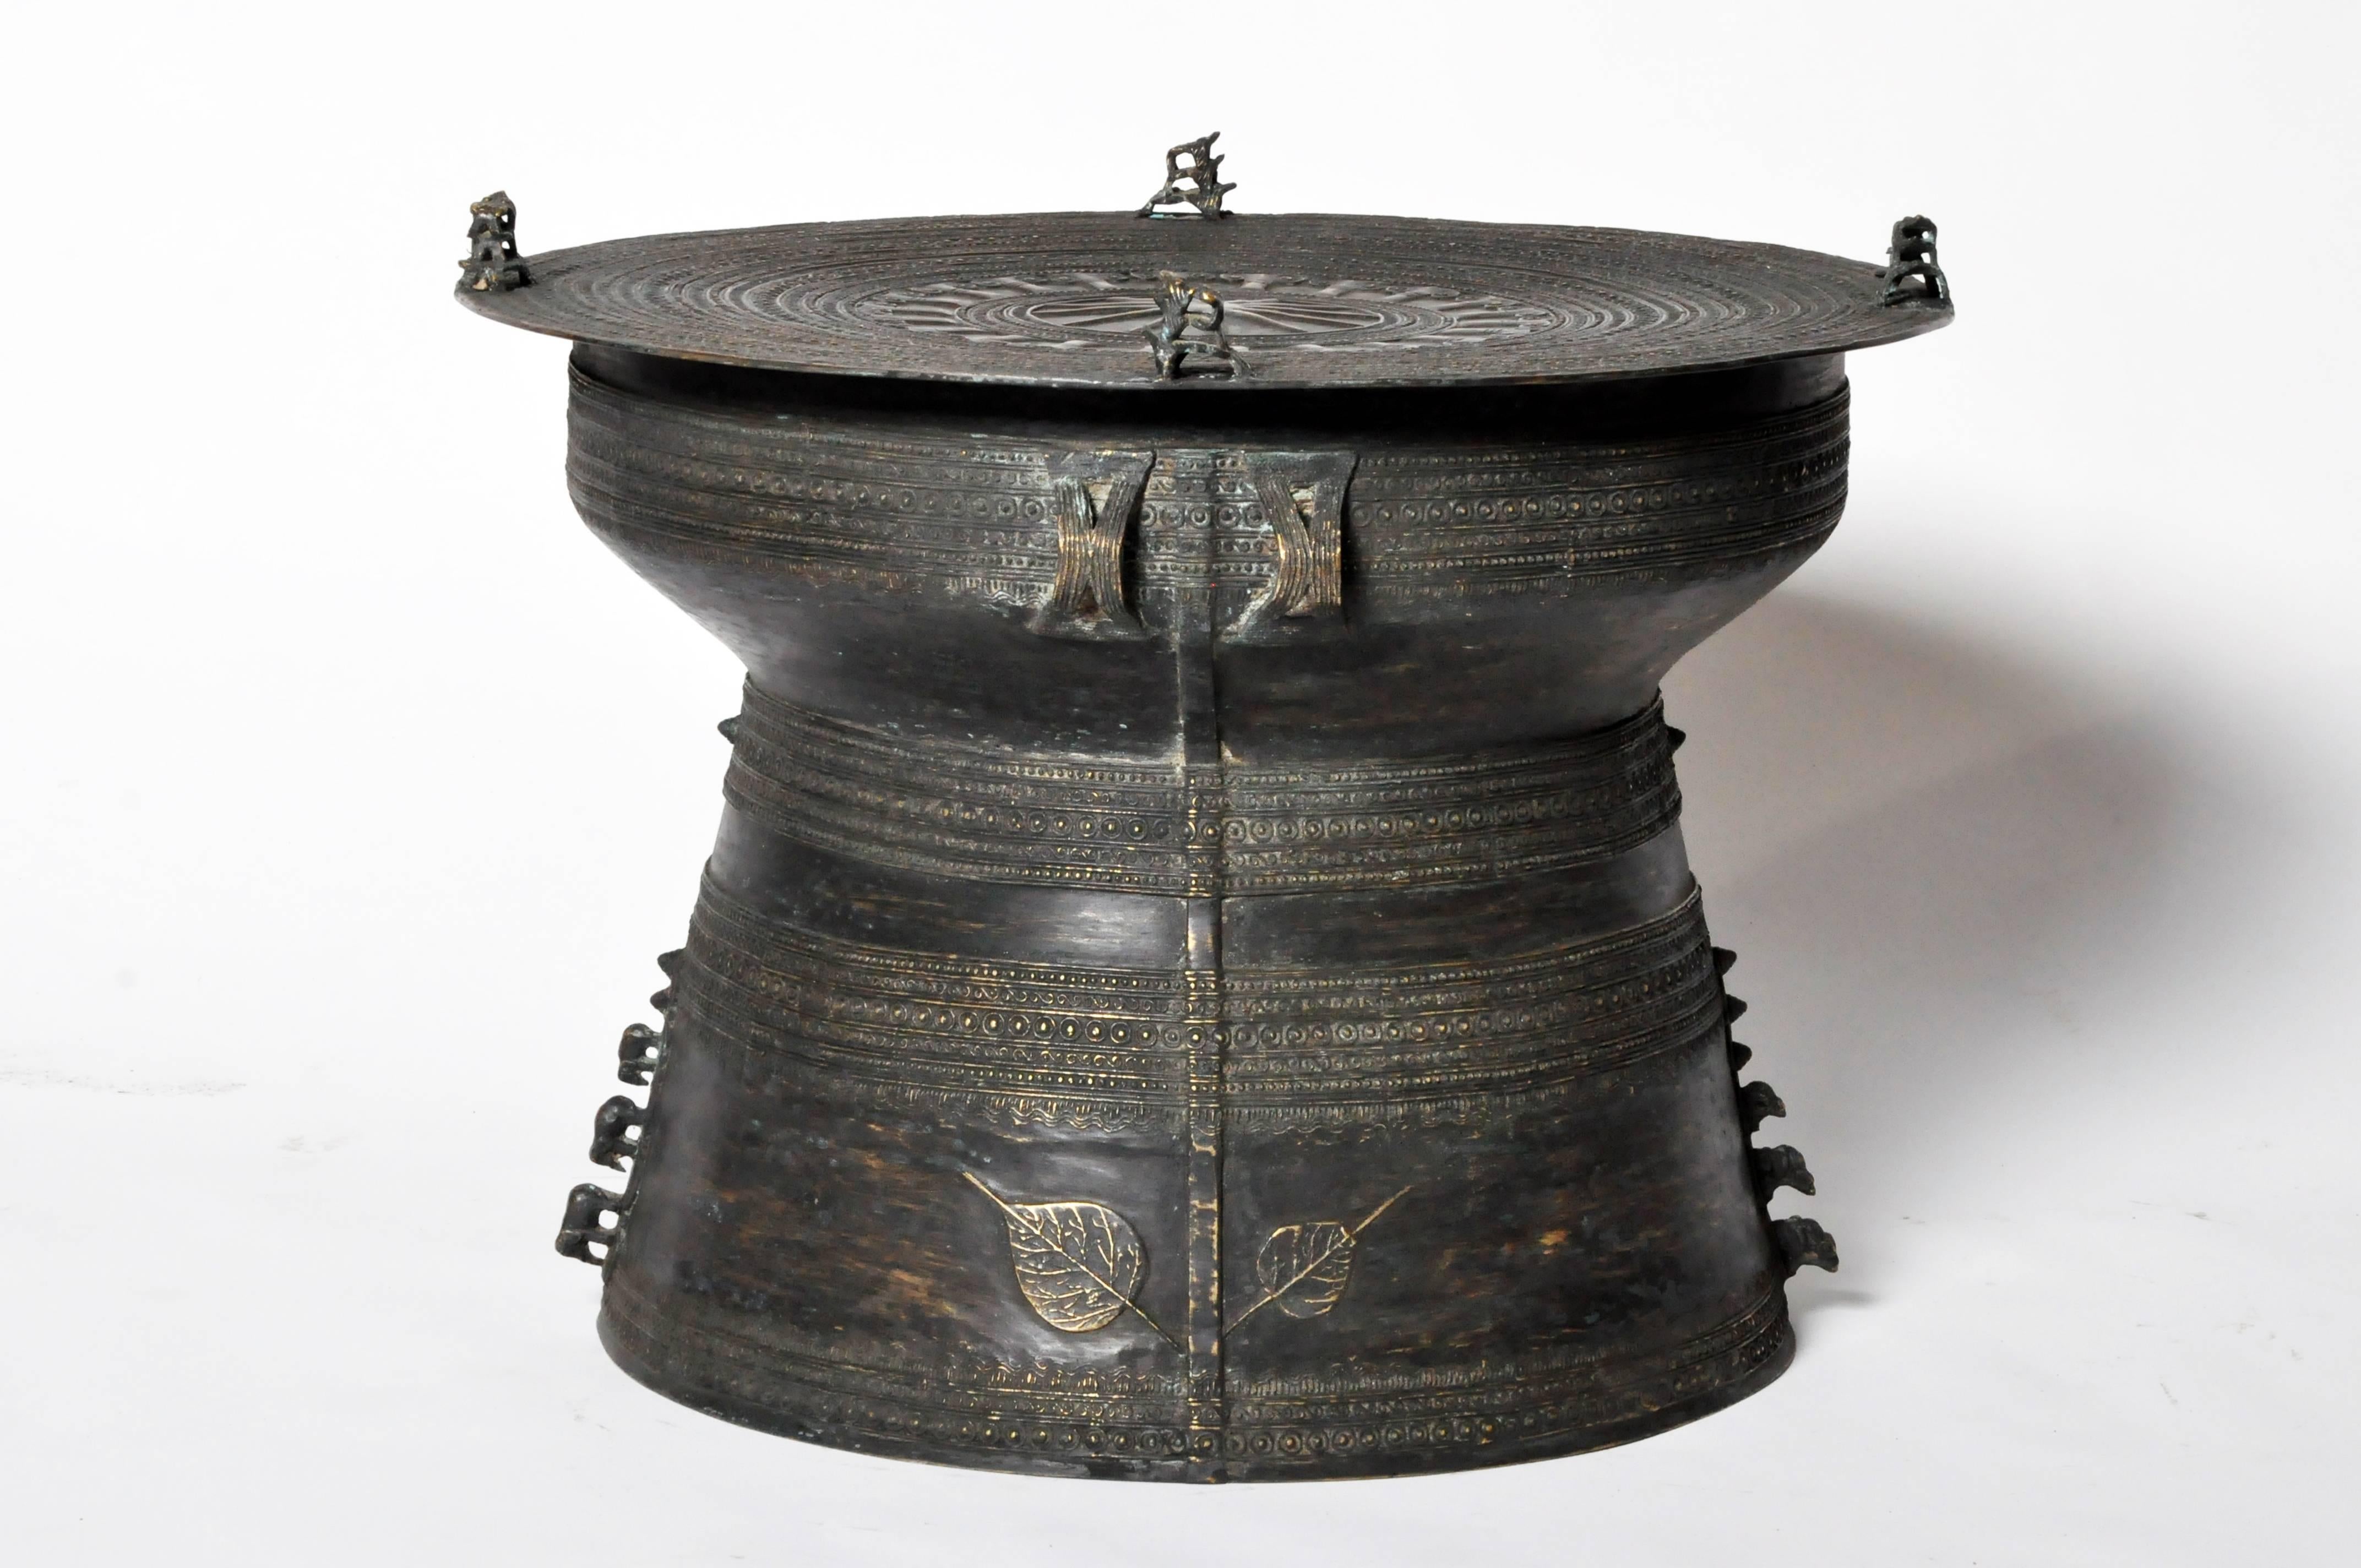 These handsomely patinated drums have circular tops with four double frog-form handles. Decorated with radiating bands and geometric patterns throughout, the waisted bodies are flanked by loop handles while their bases feature large leaf outlines